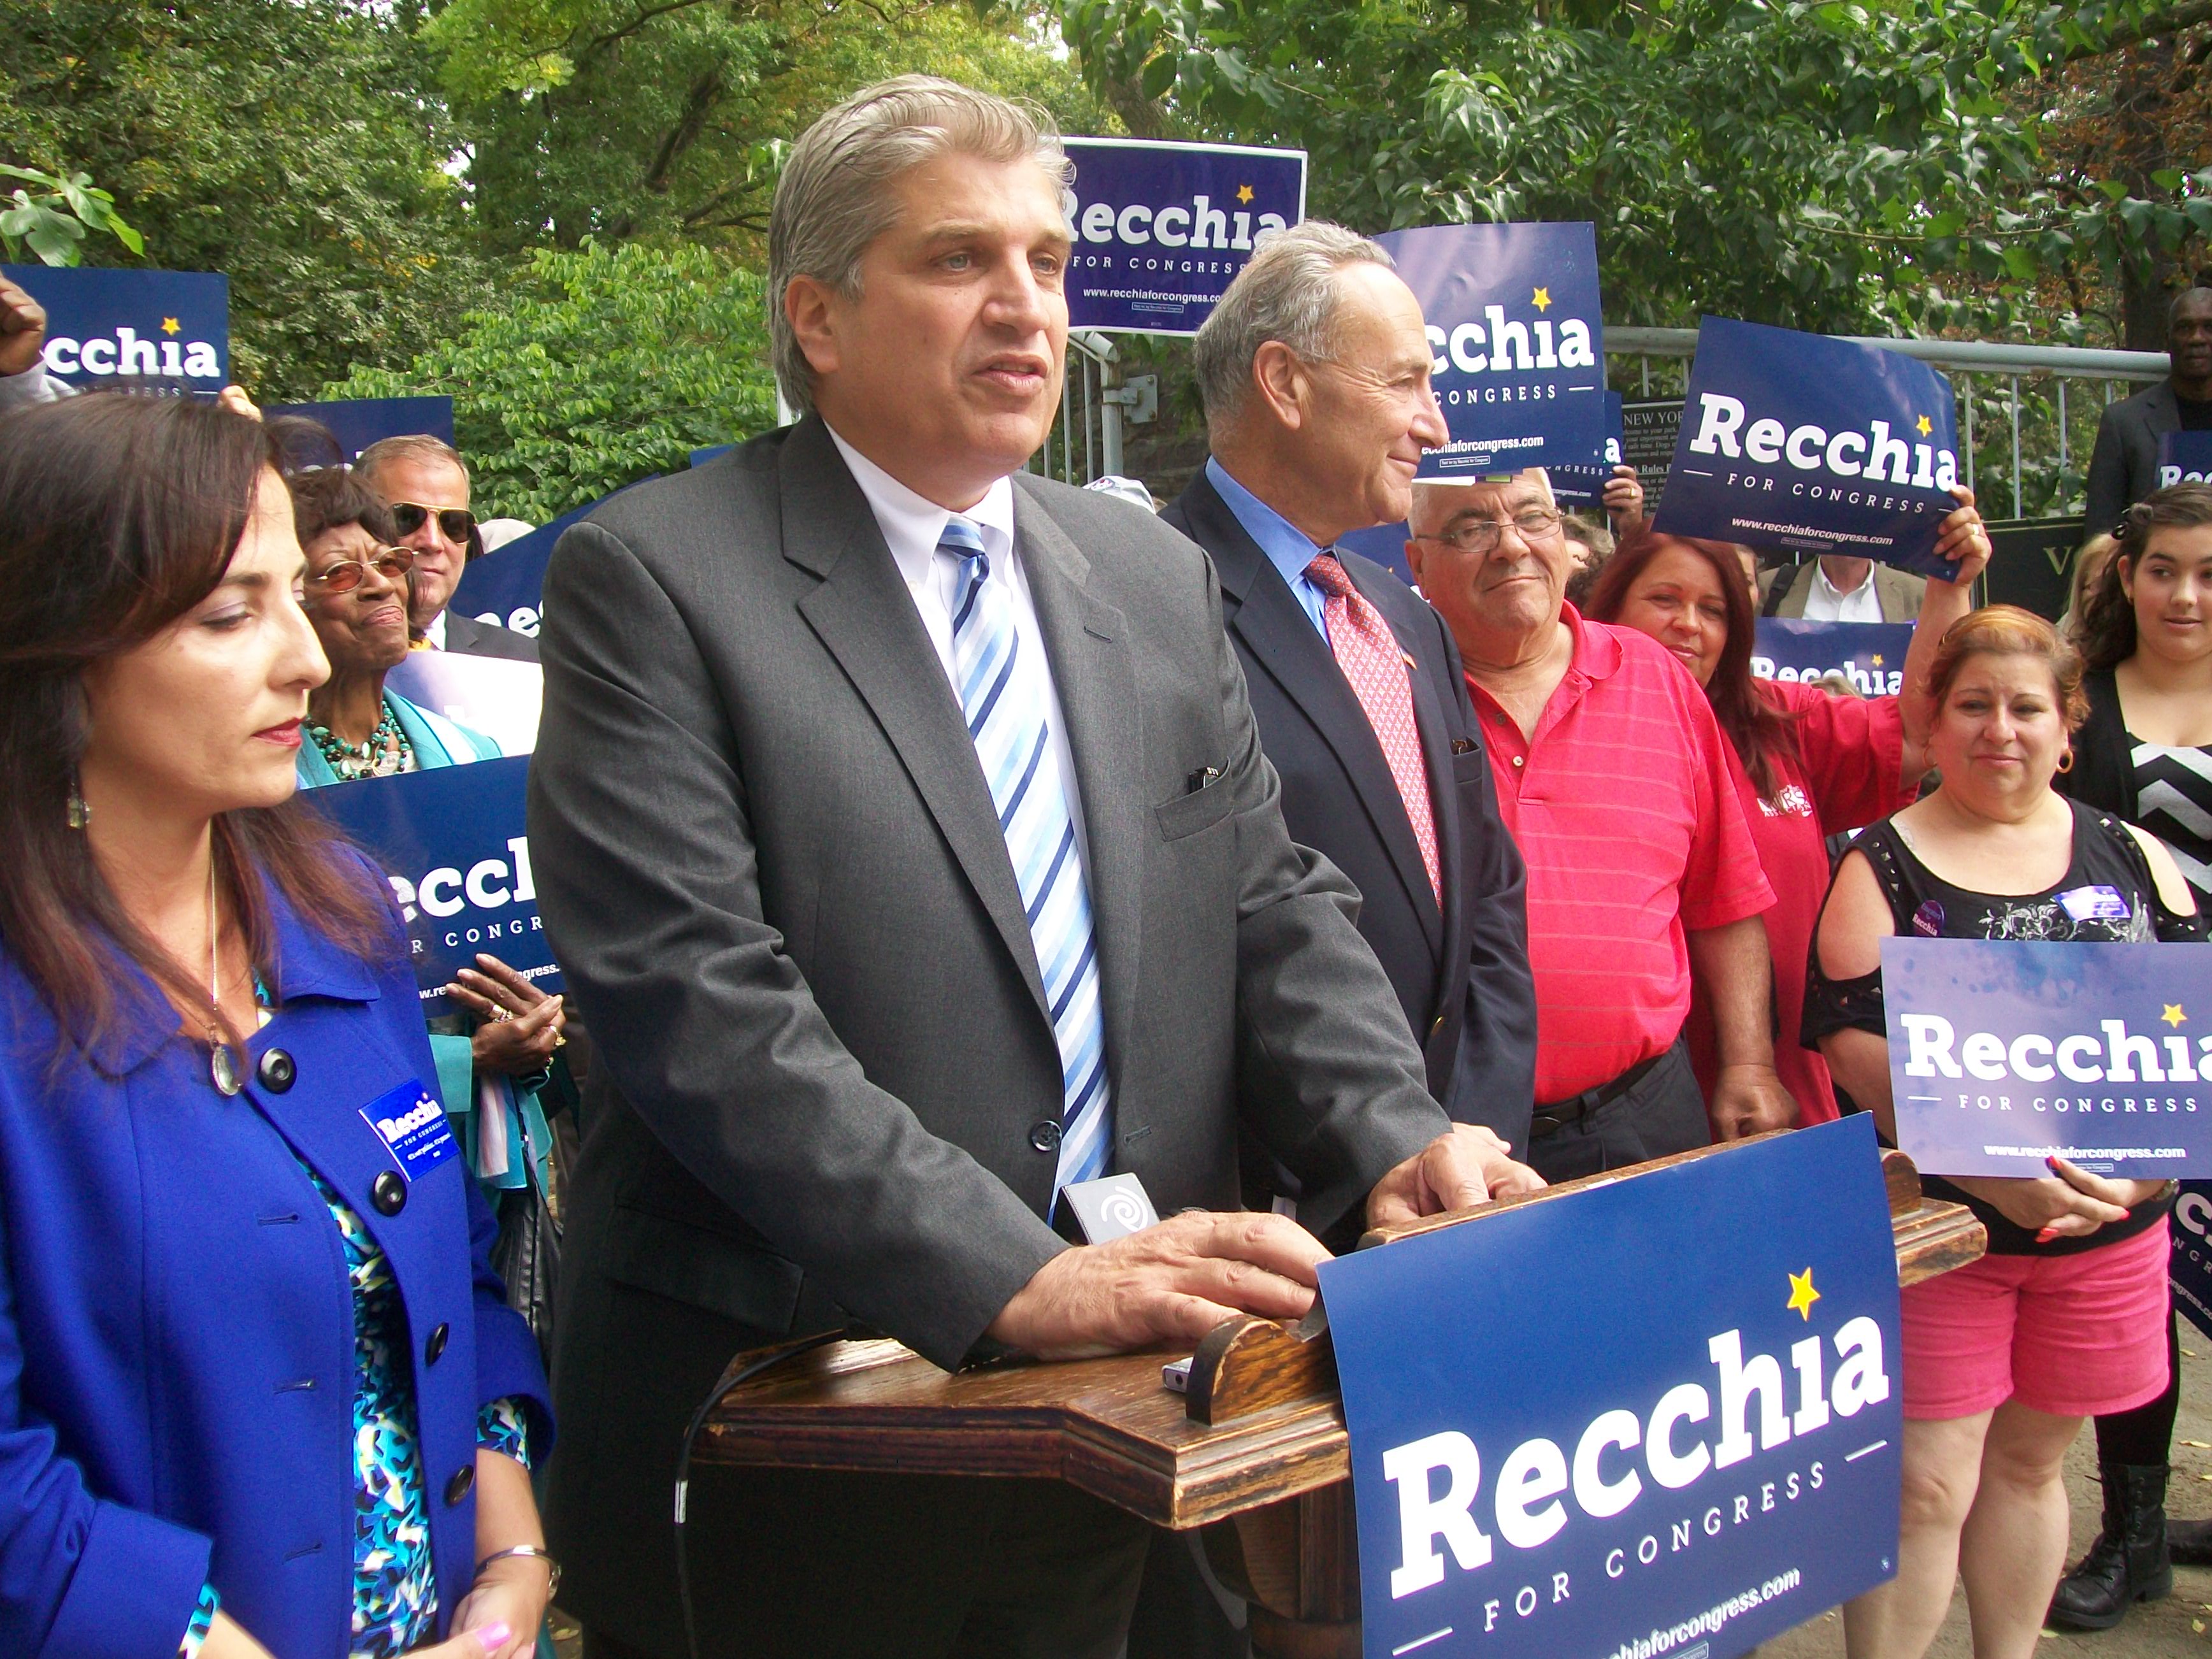 Domenic Recchia at an endorsement event with Senator Charles Schumer in September. (Photo: Ross Barkan)